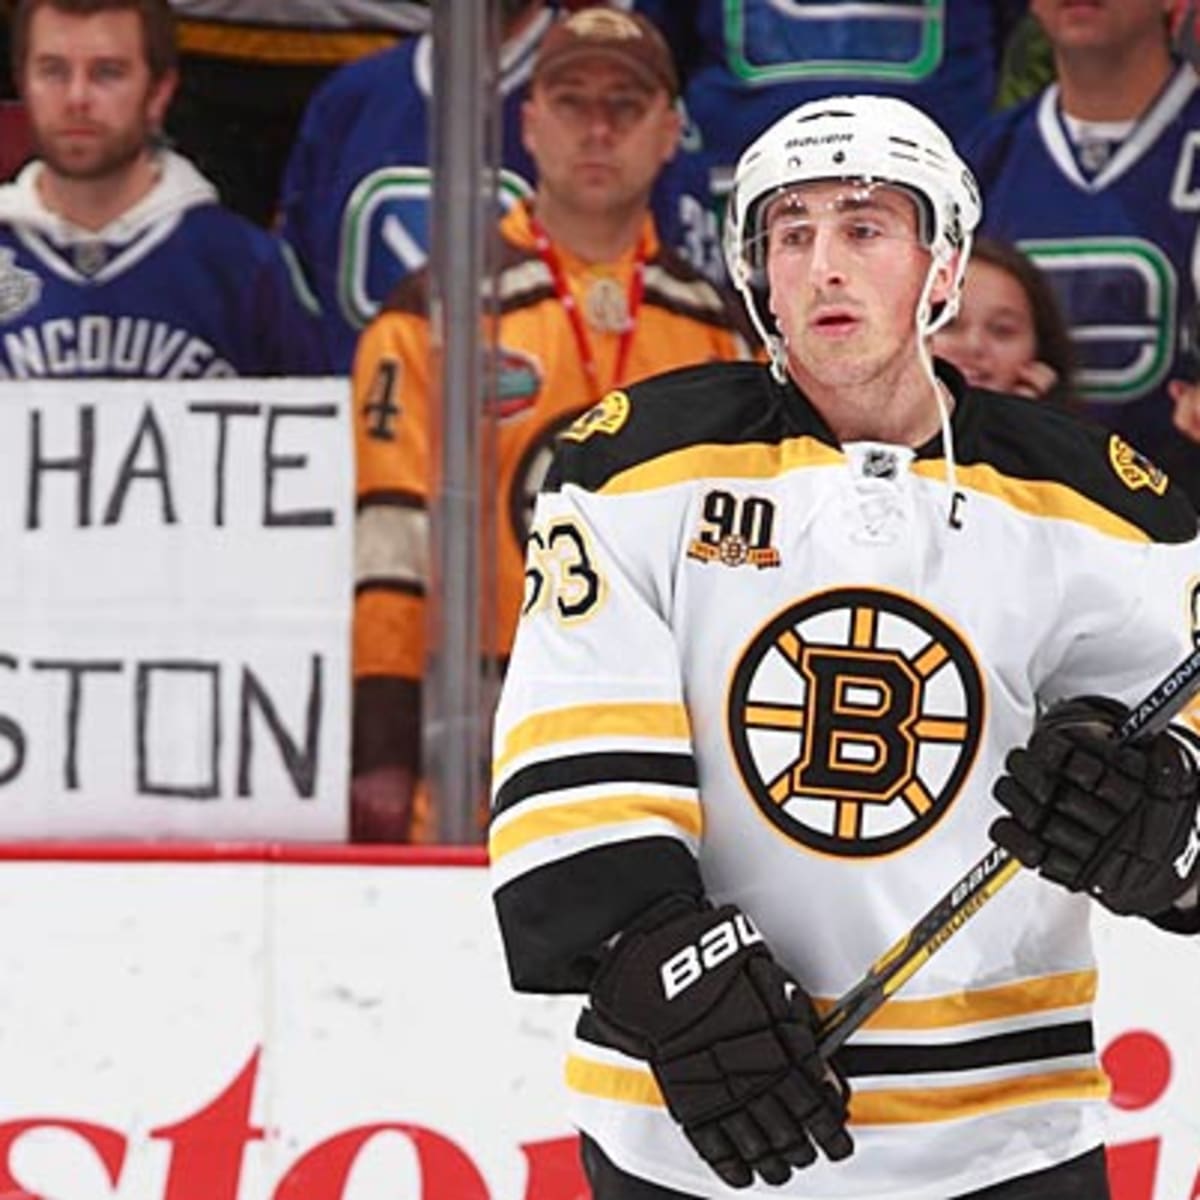 Bruins Notebook: Brad Marchand suspended three games by NHL